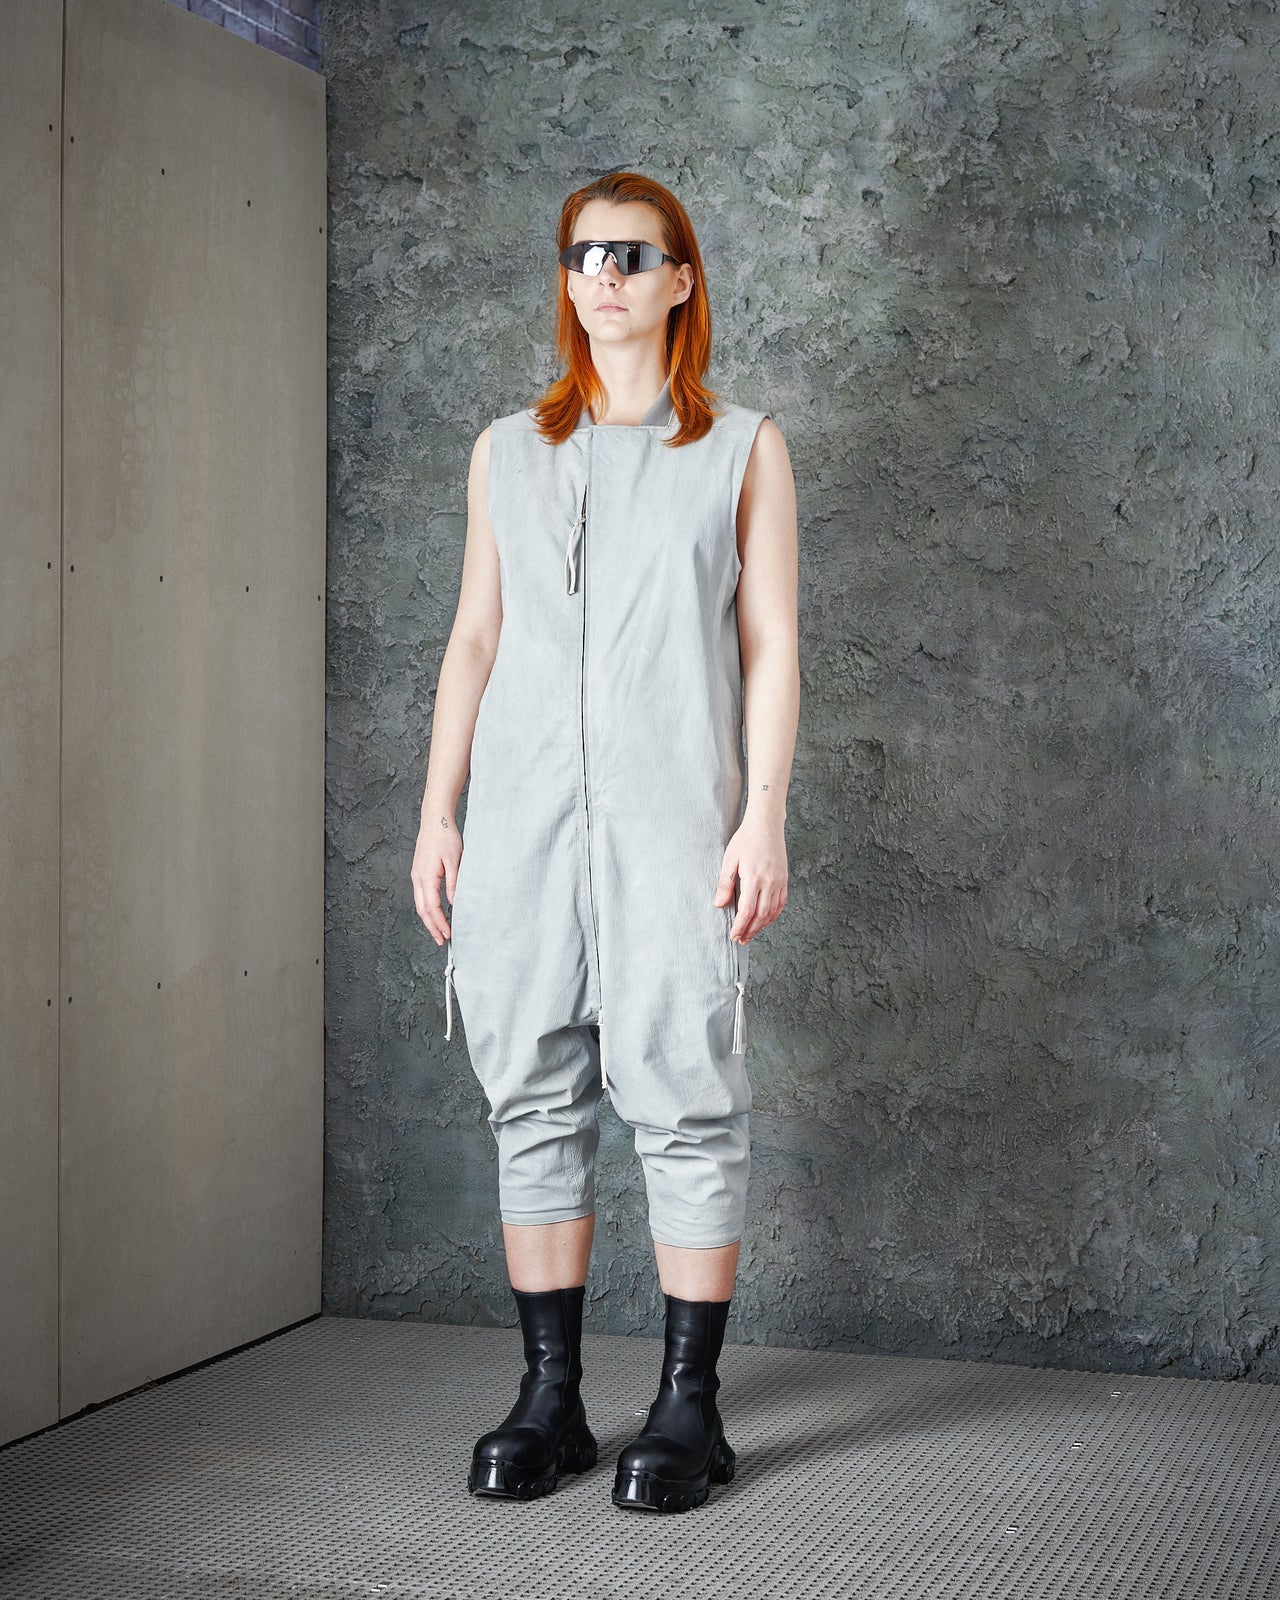 SS 2016 Dyed Calf Leather Jumpsuit